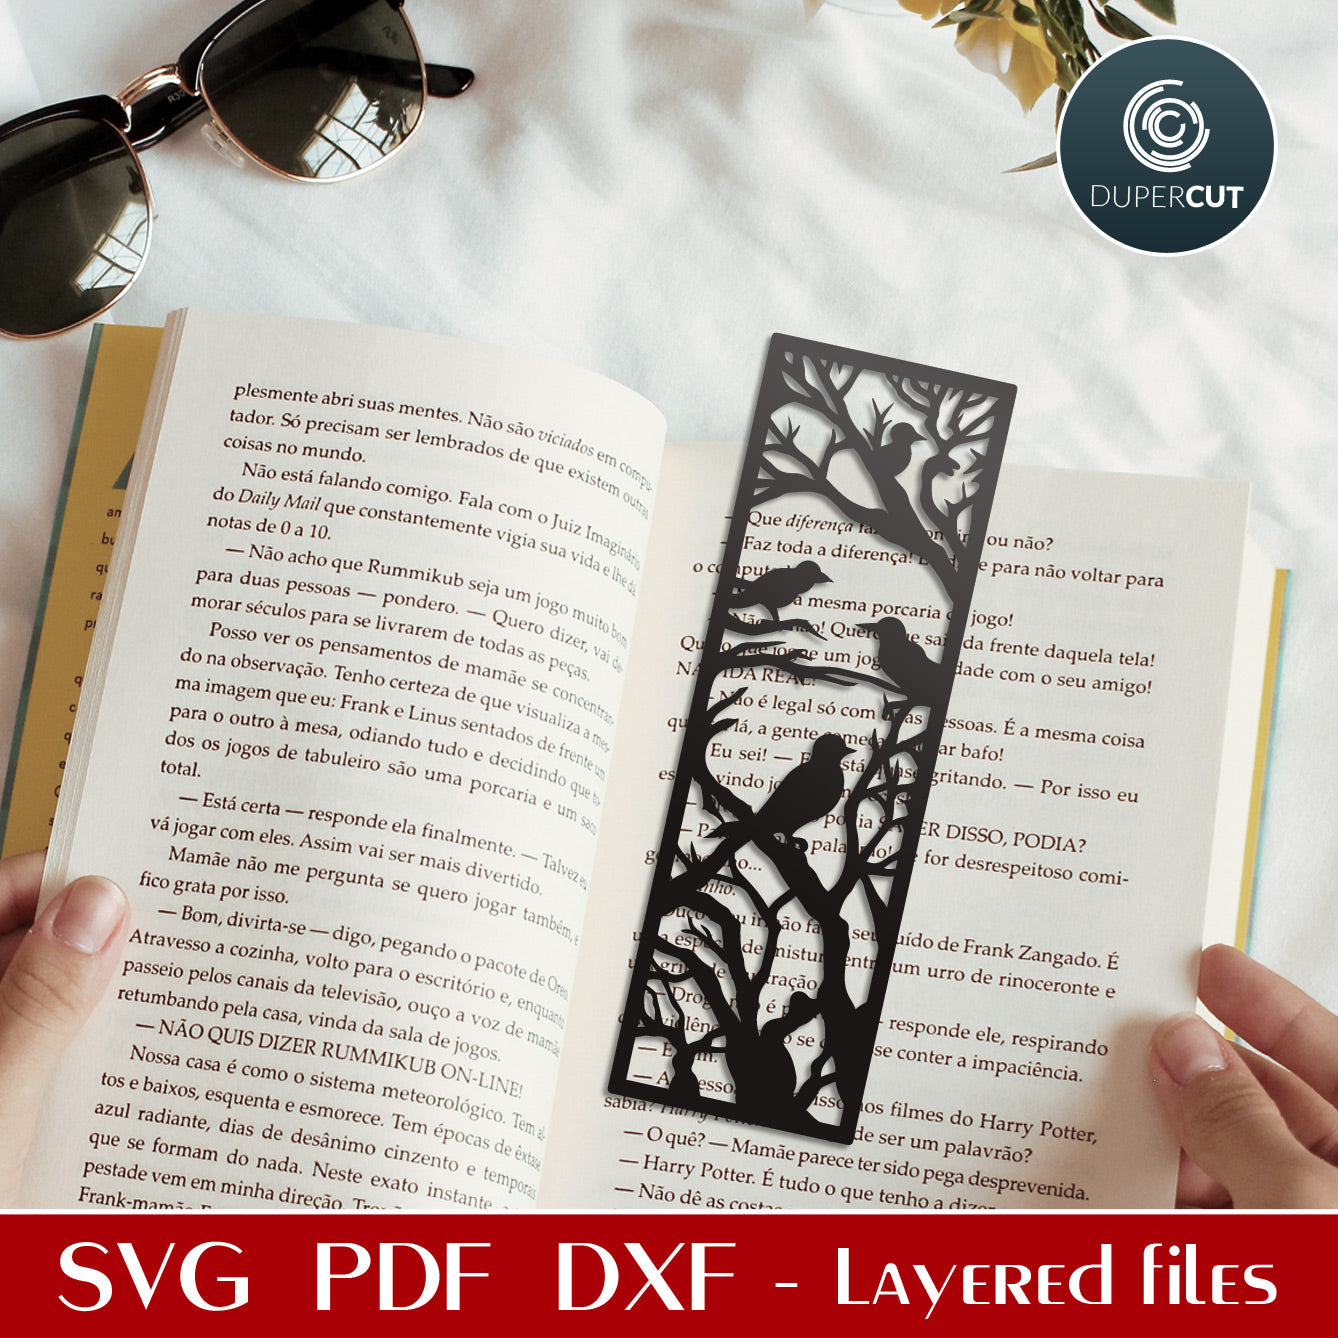 DIY birds on a tree detailed bookmark - SVG DXF vector files for laser cutting machines, Glowforge, Cricut, Silhouette, CNC plasma machines by www.DuperCut.com